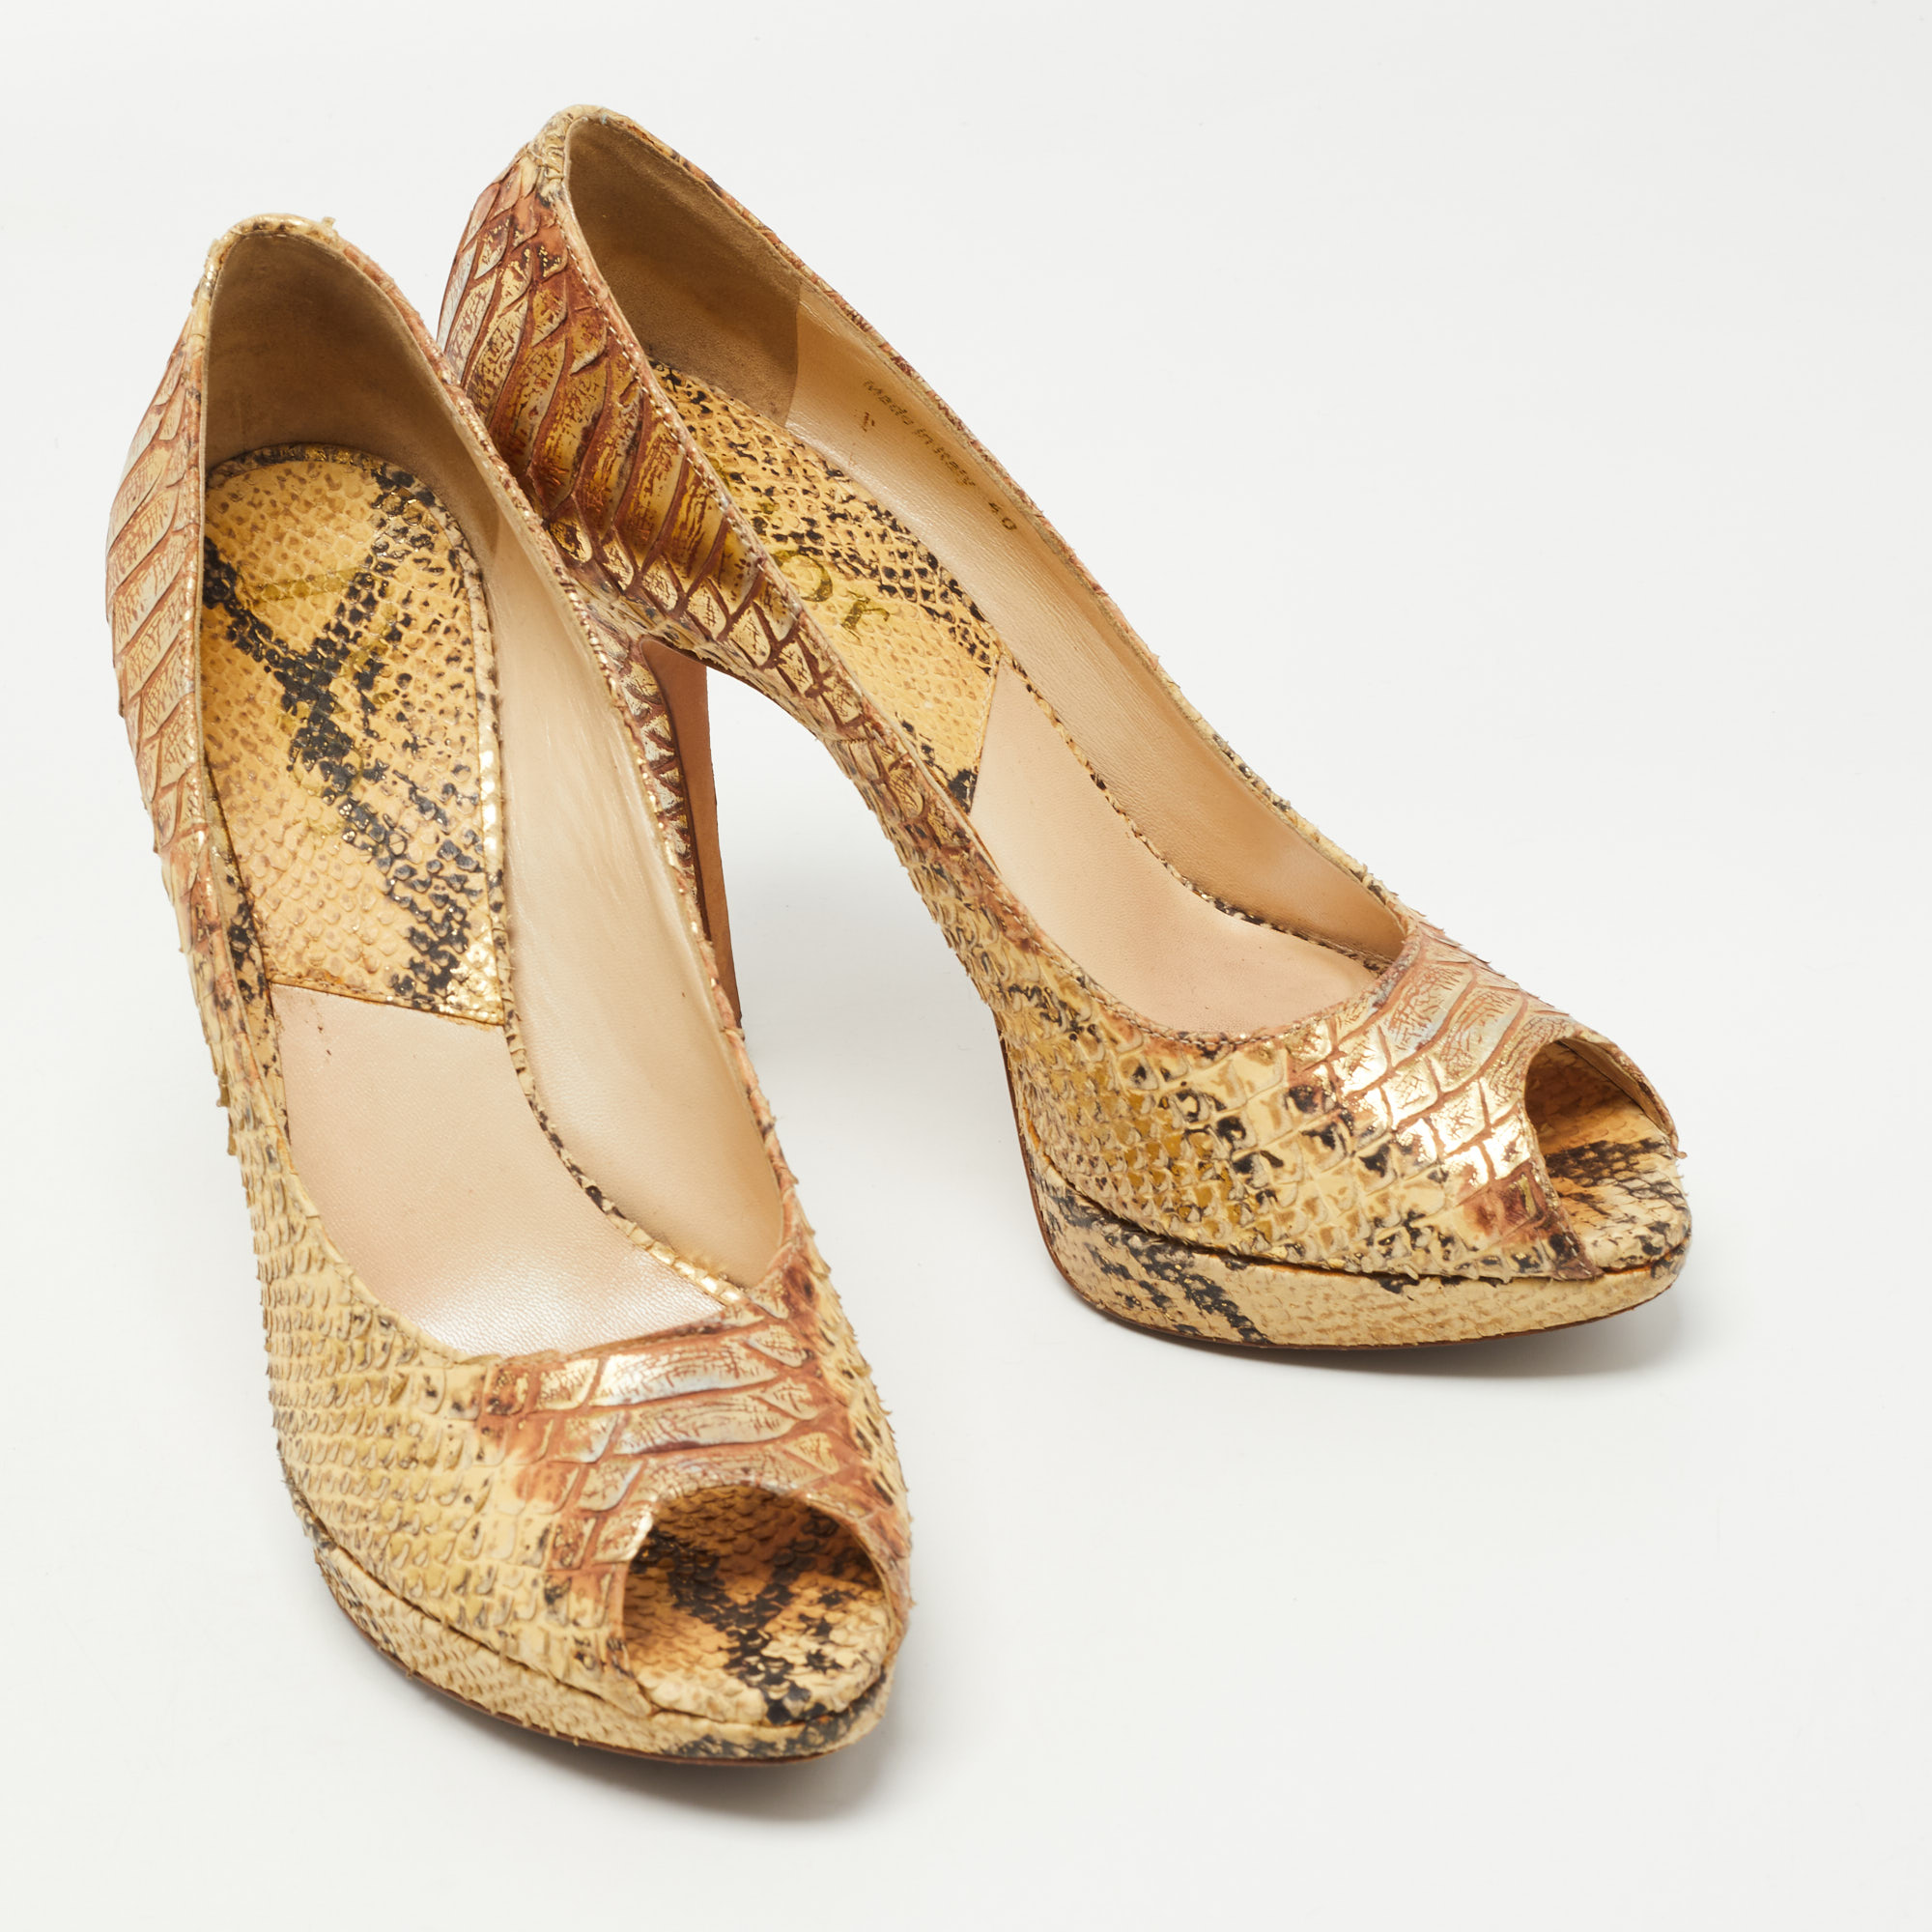 Dior Gold/Yellow Python Embossed Leather Miss Dior Peep-Toe Platform Pumps Size 40